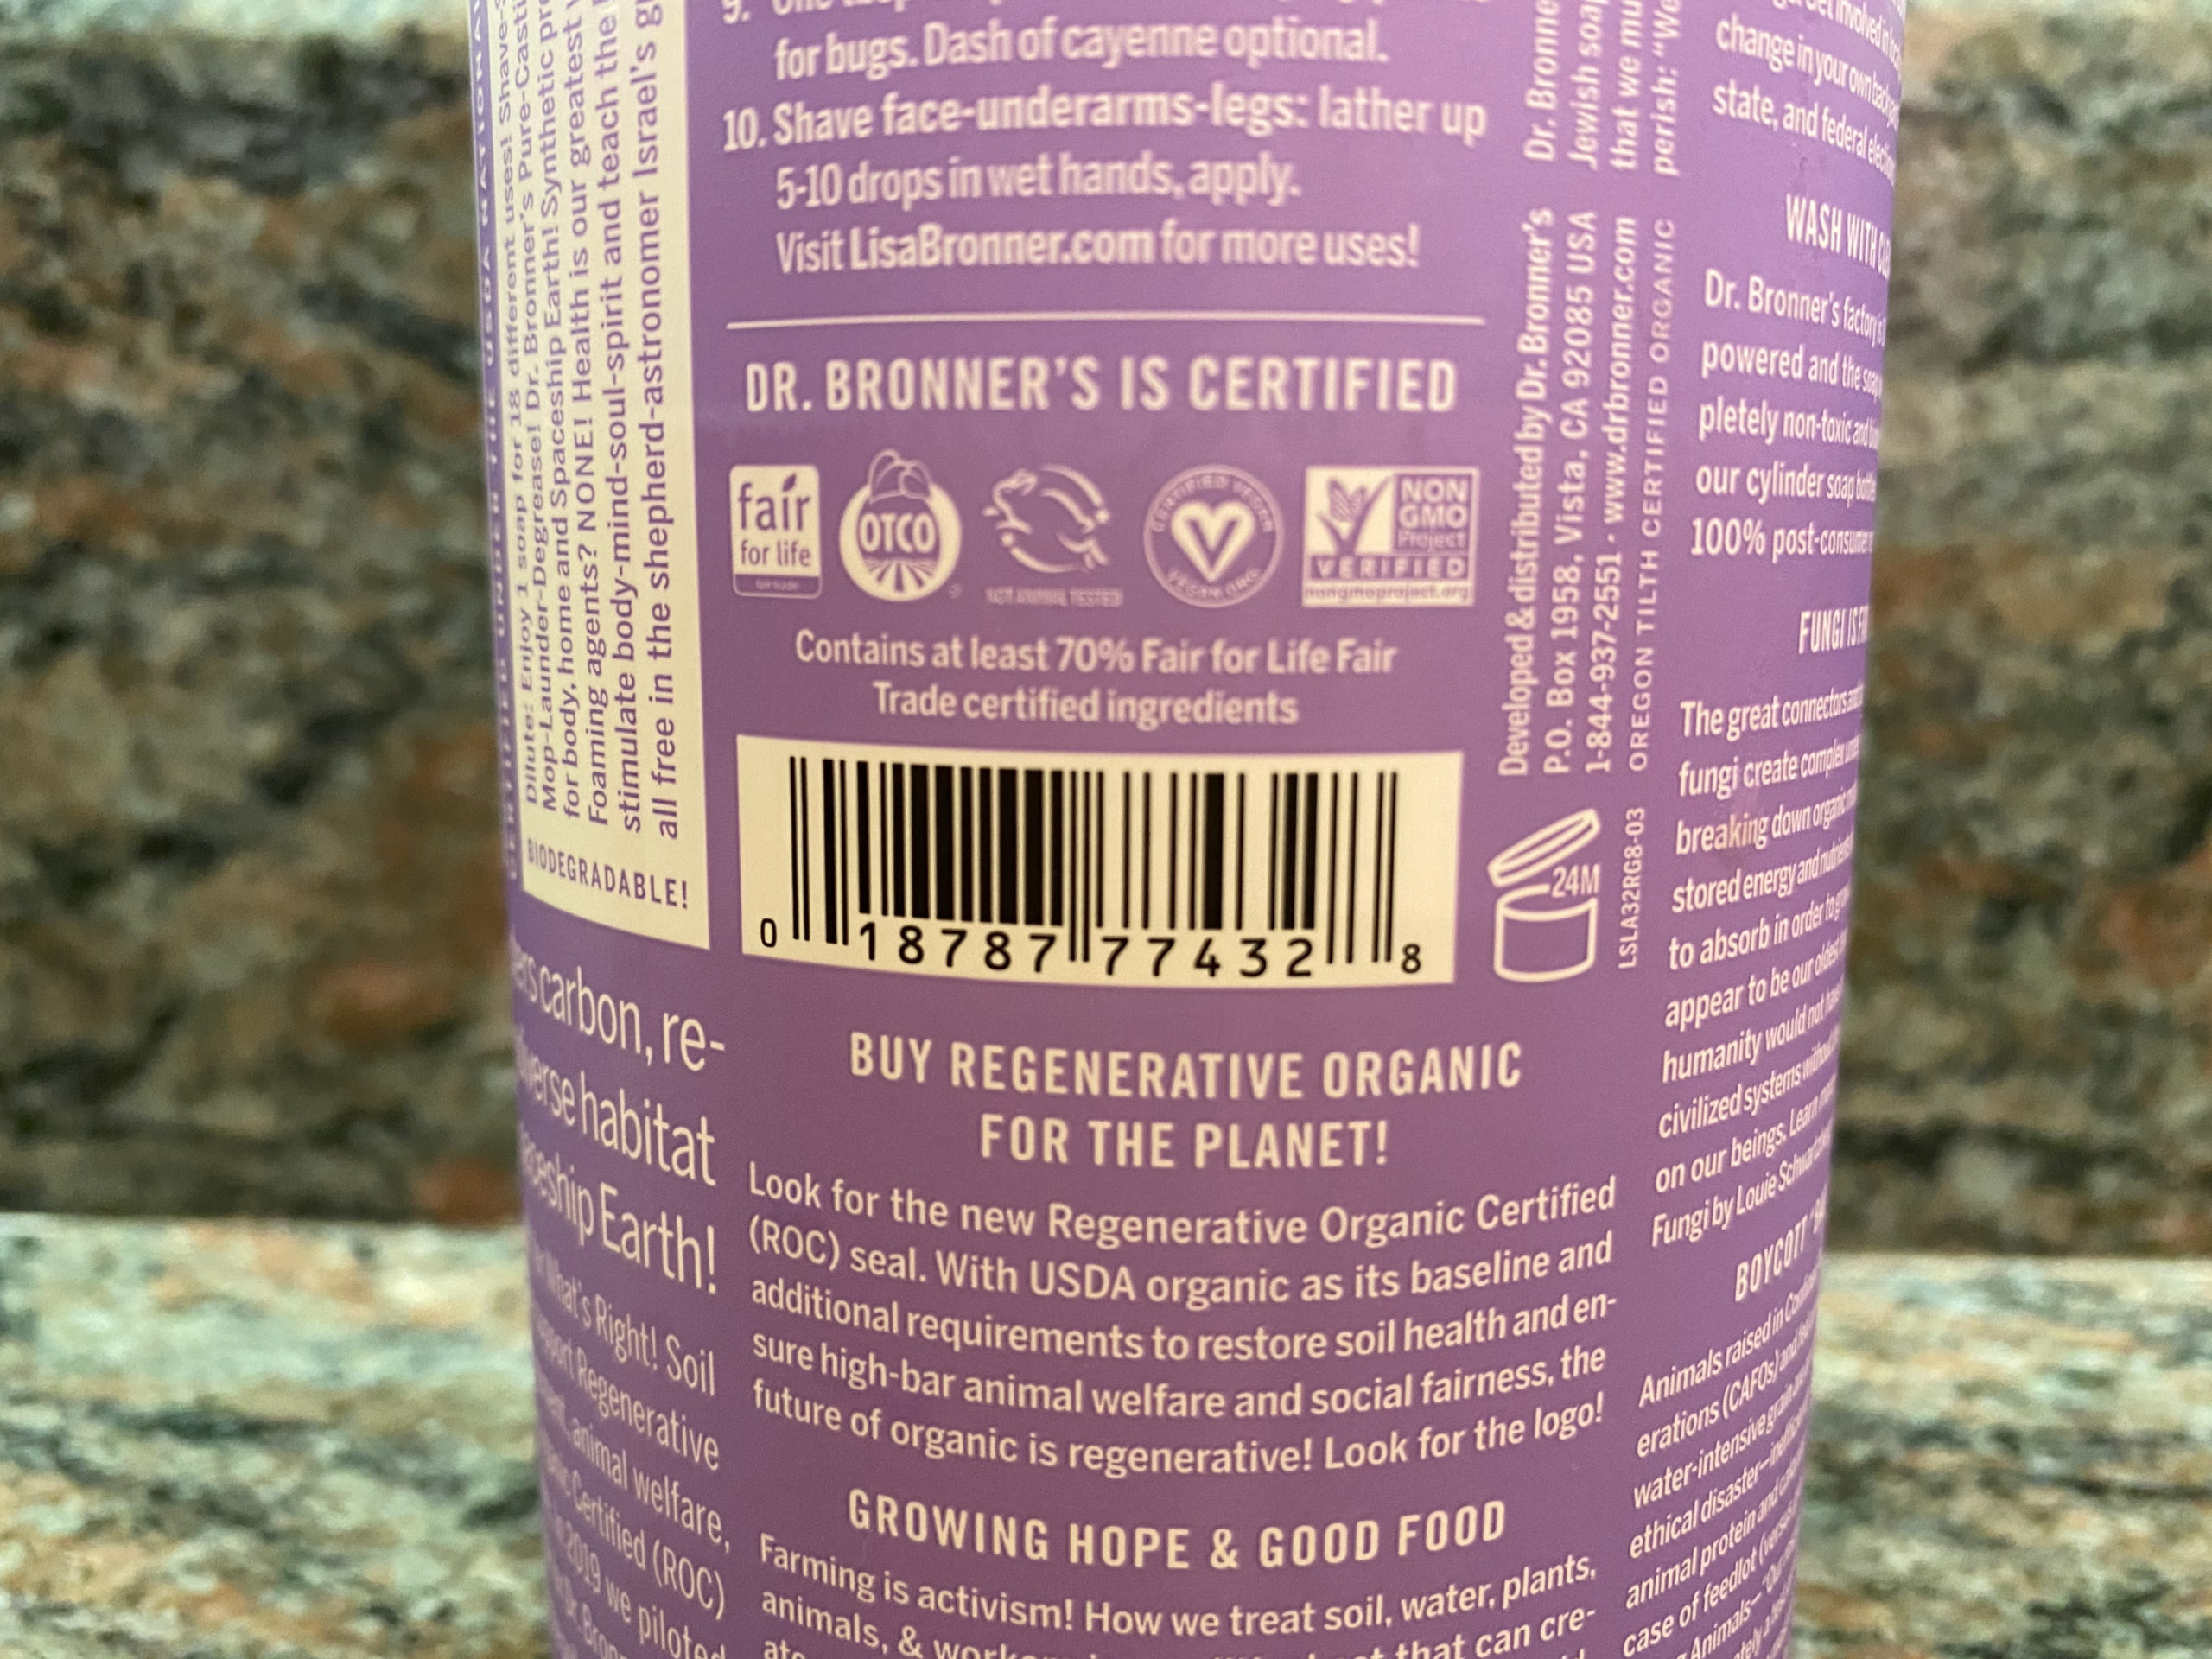 Dr. Bronner's sports a slew of certification labels!